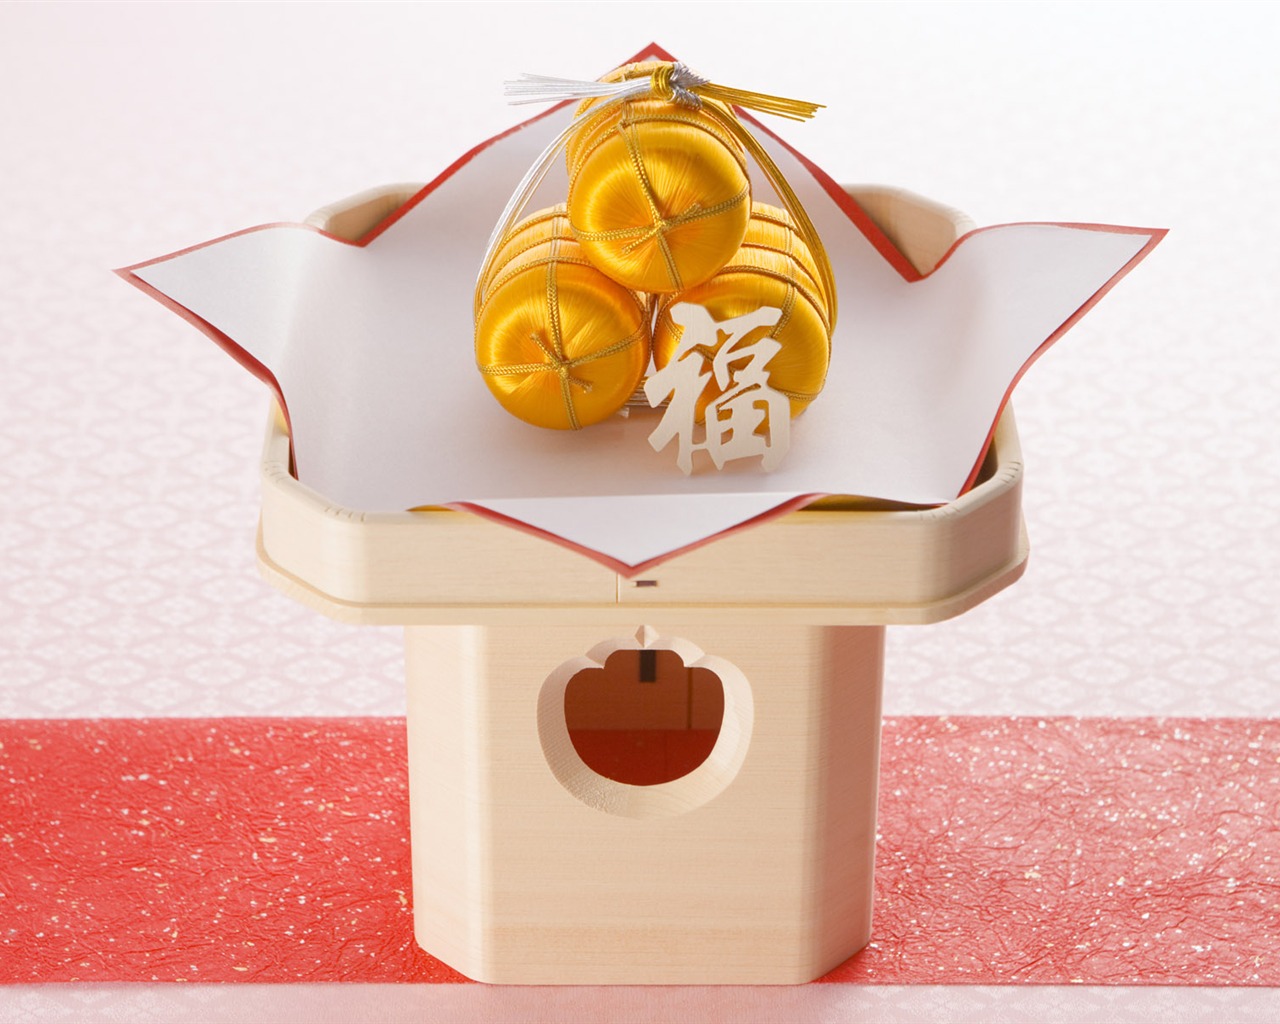 Japanese New Year Culture Wallpaper (2) #13 - 1280x1024